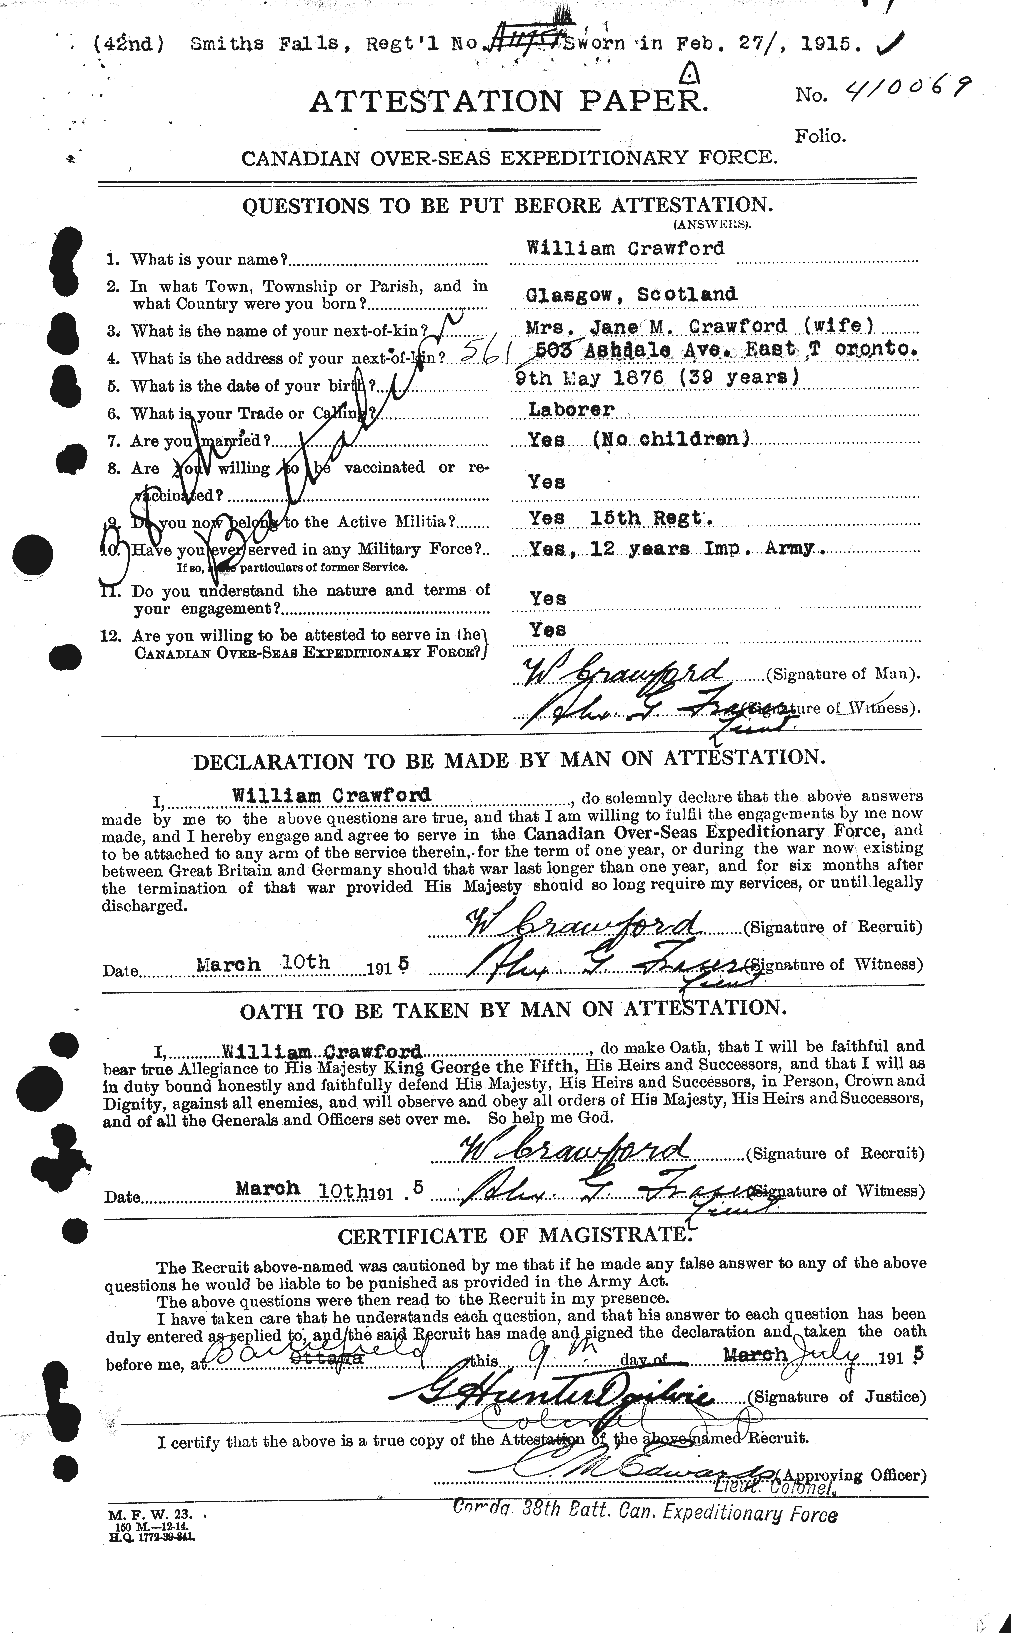 Personnel Records of the First World War - CEF 061159a